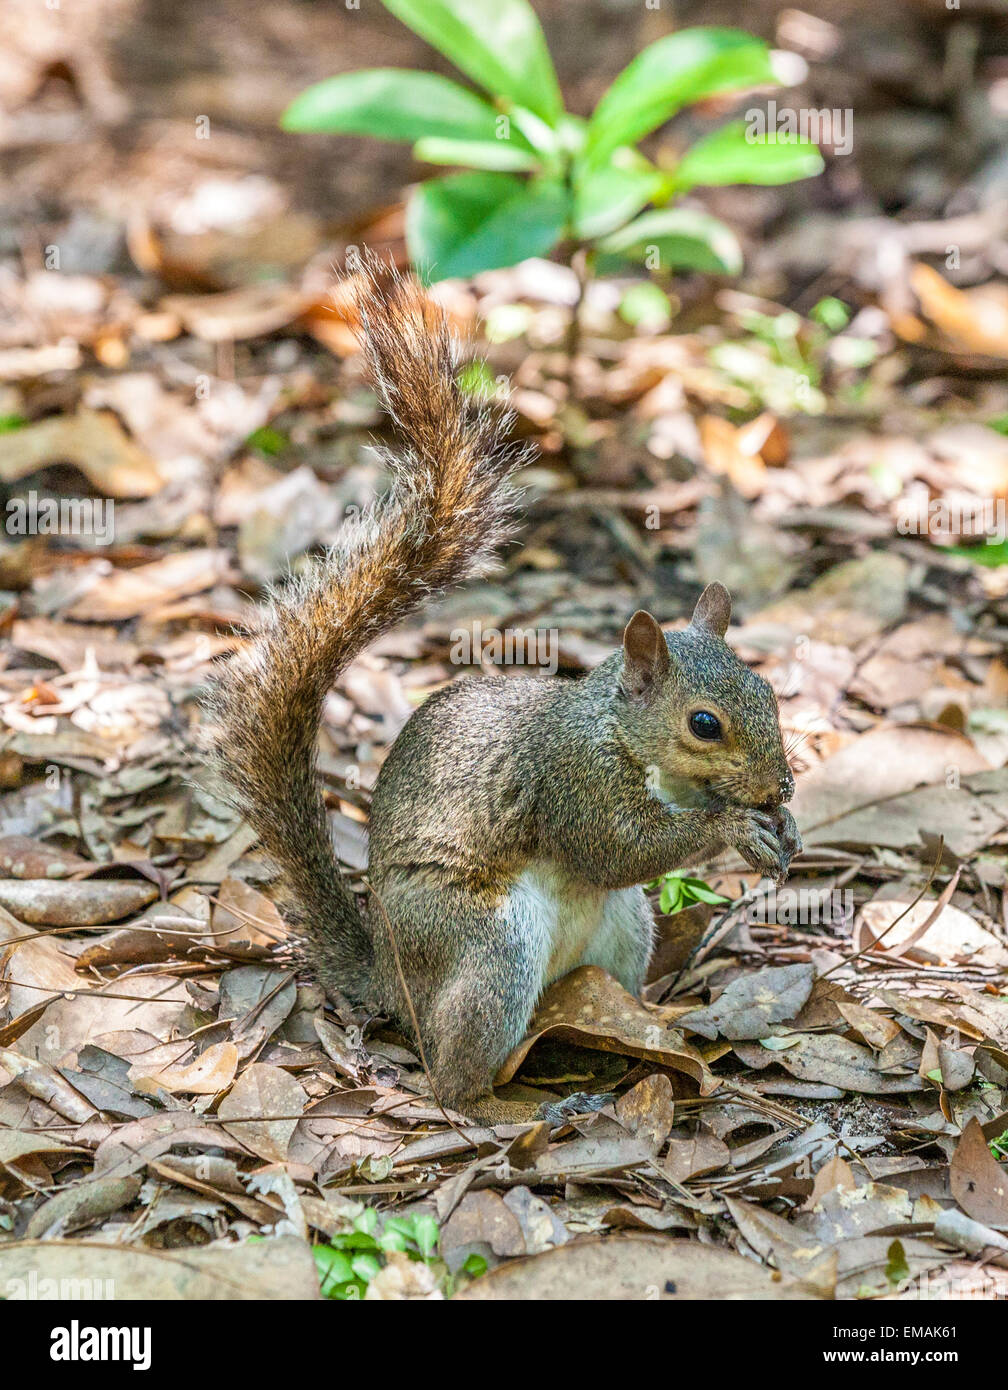 squirrel in the summer garden protects her food Stock Photo